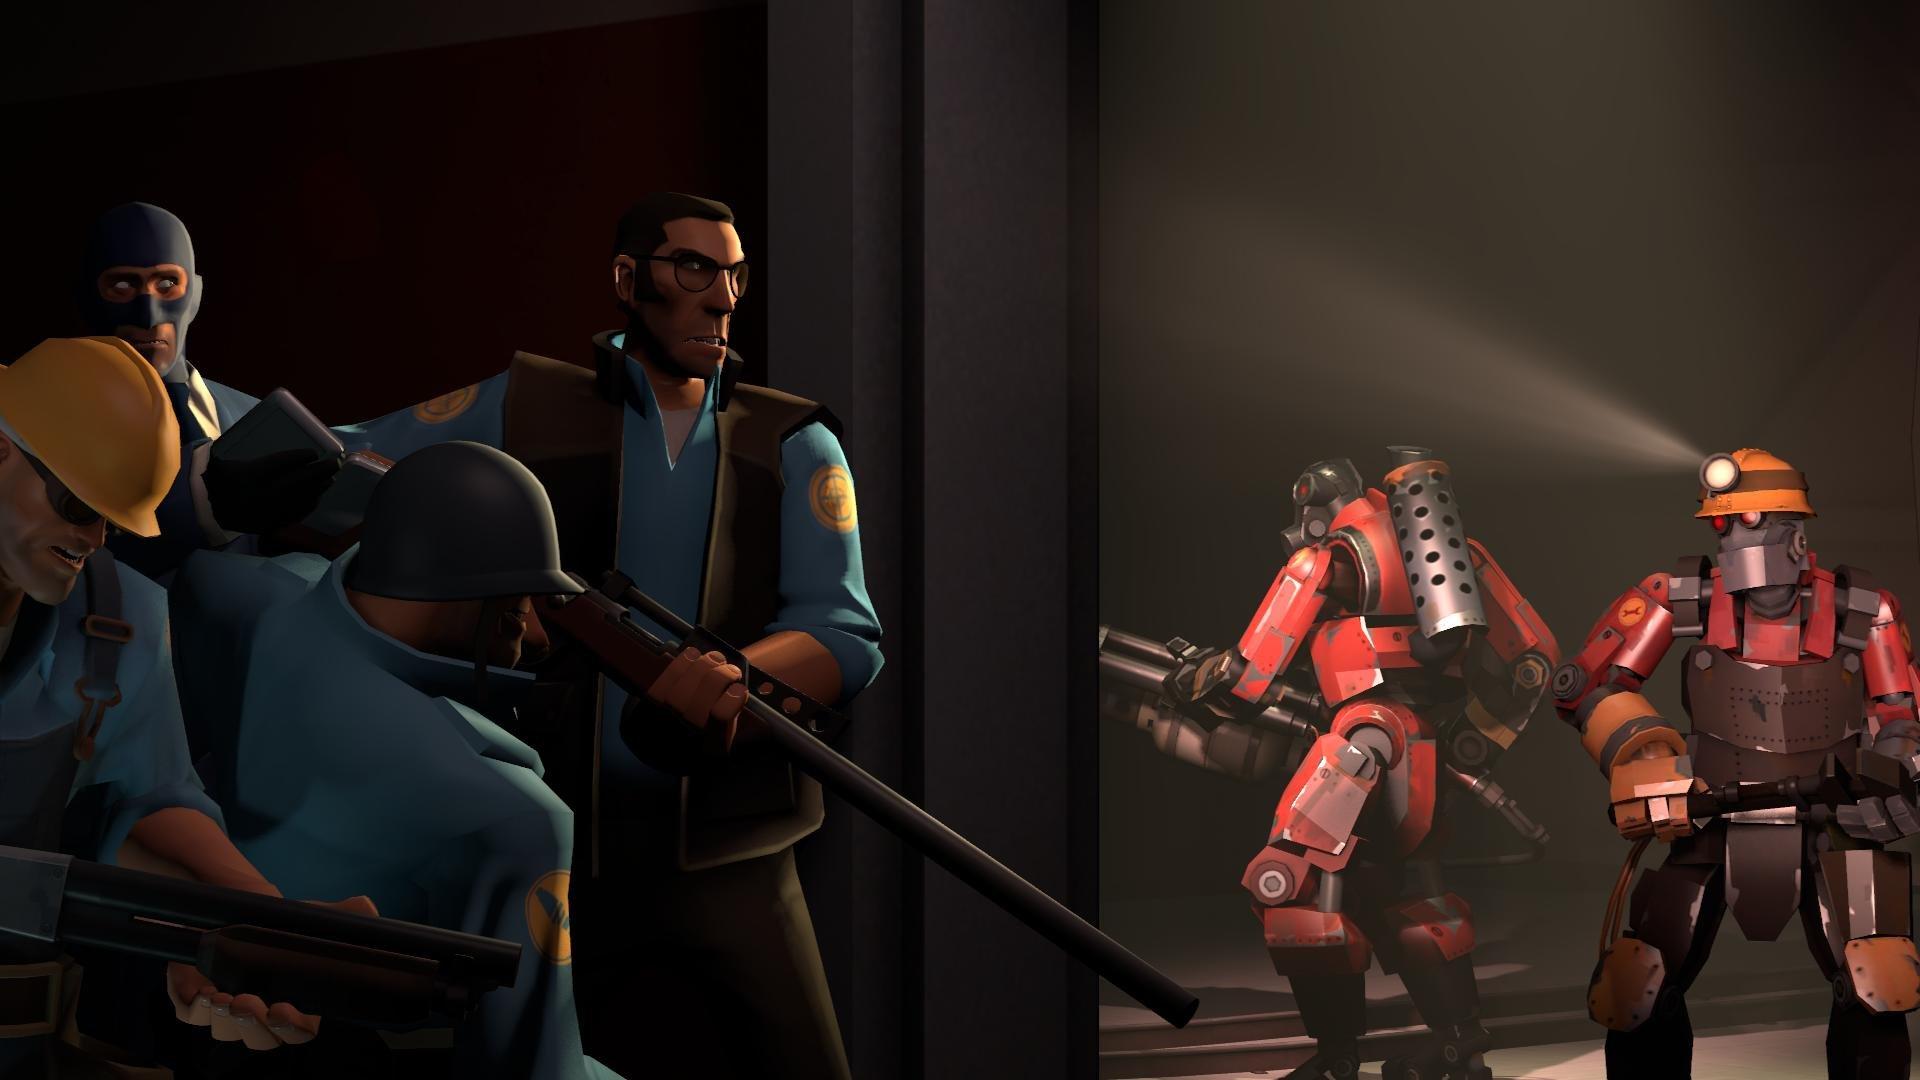 So what's BLU been doing during MvM all this time?